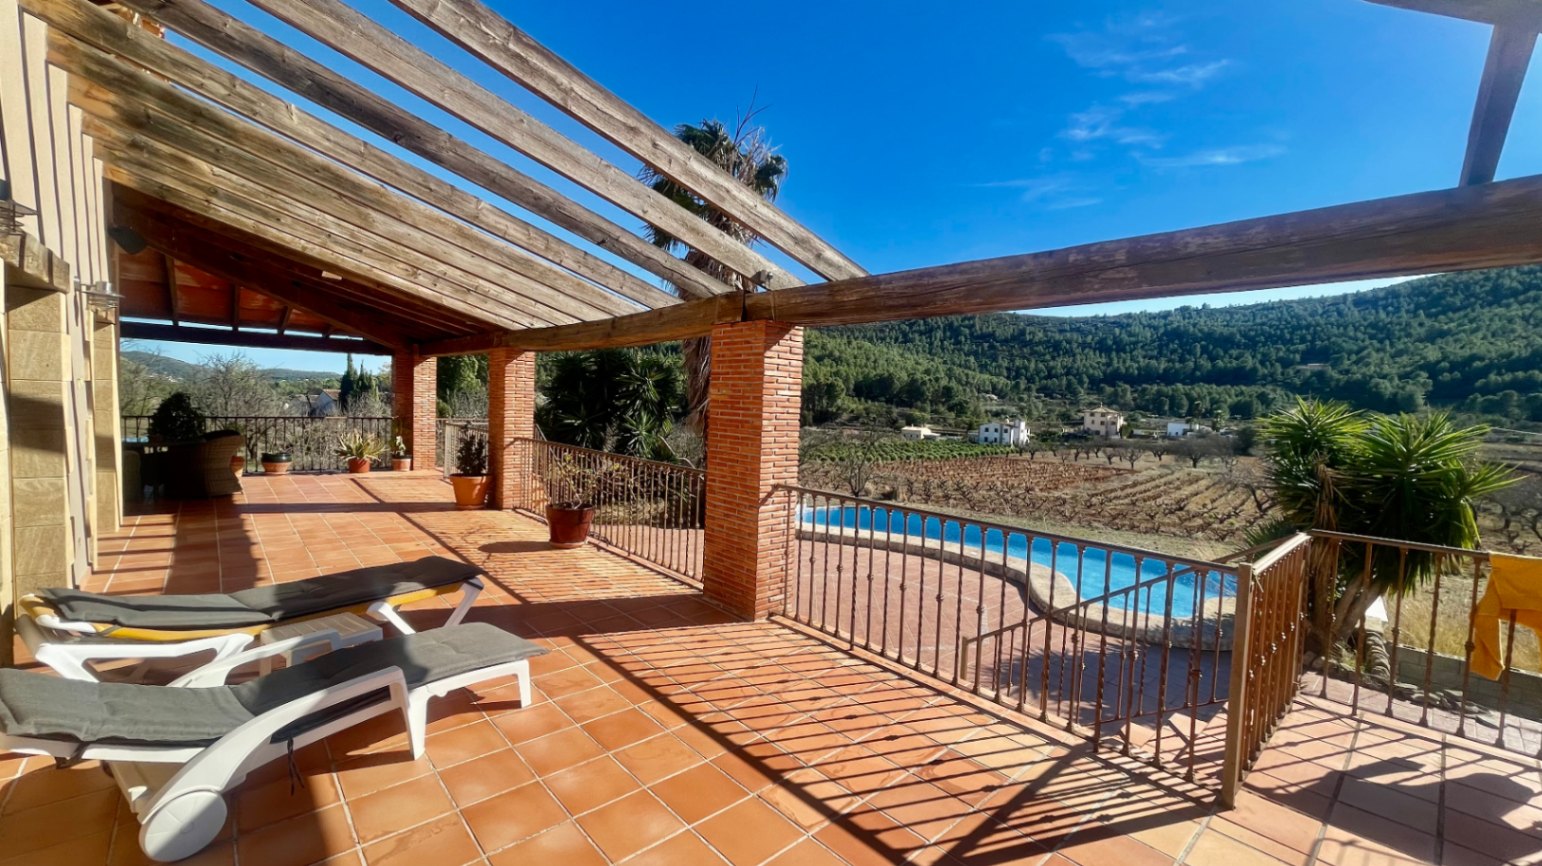 Finca with commercial license for disabled holiday retreat